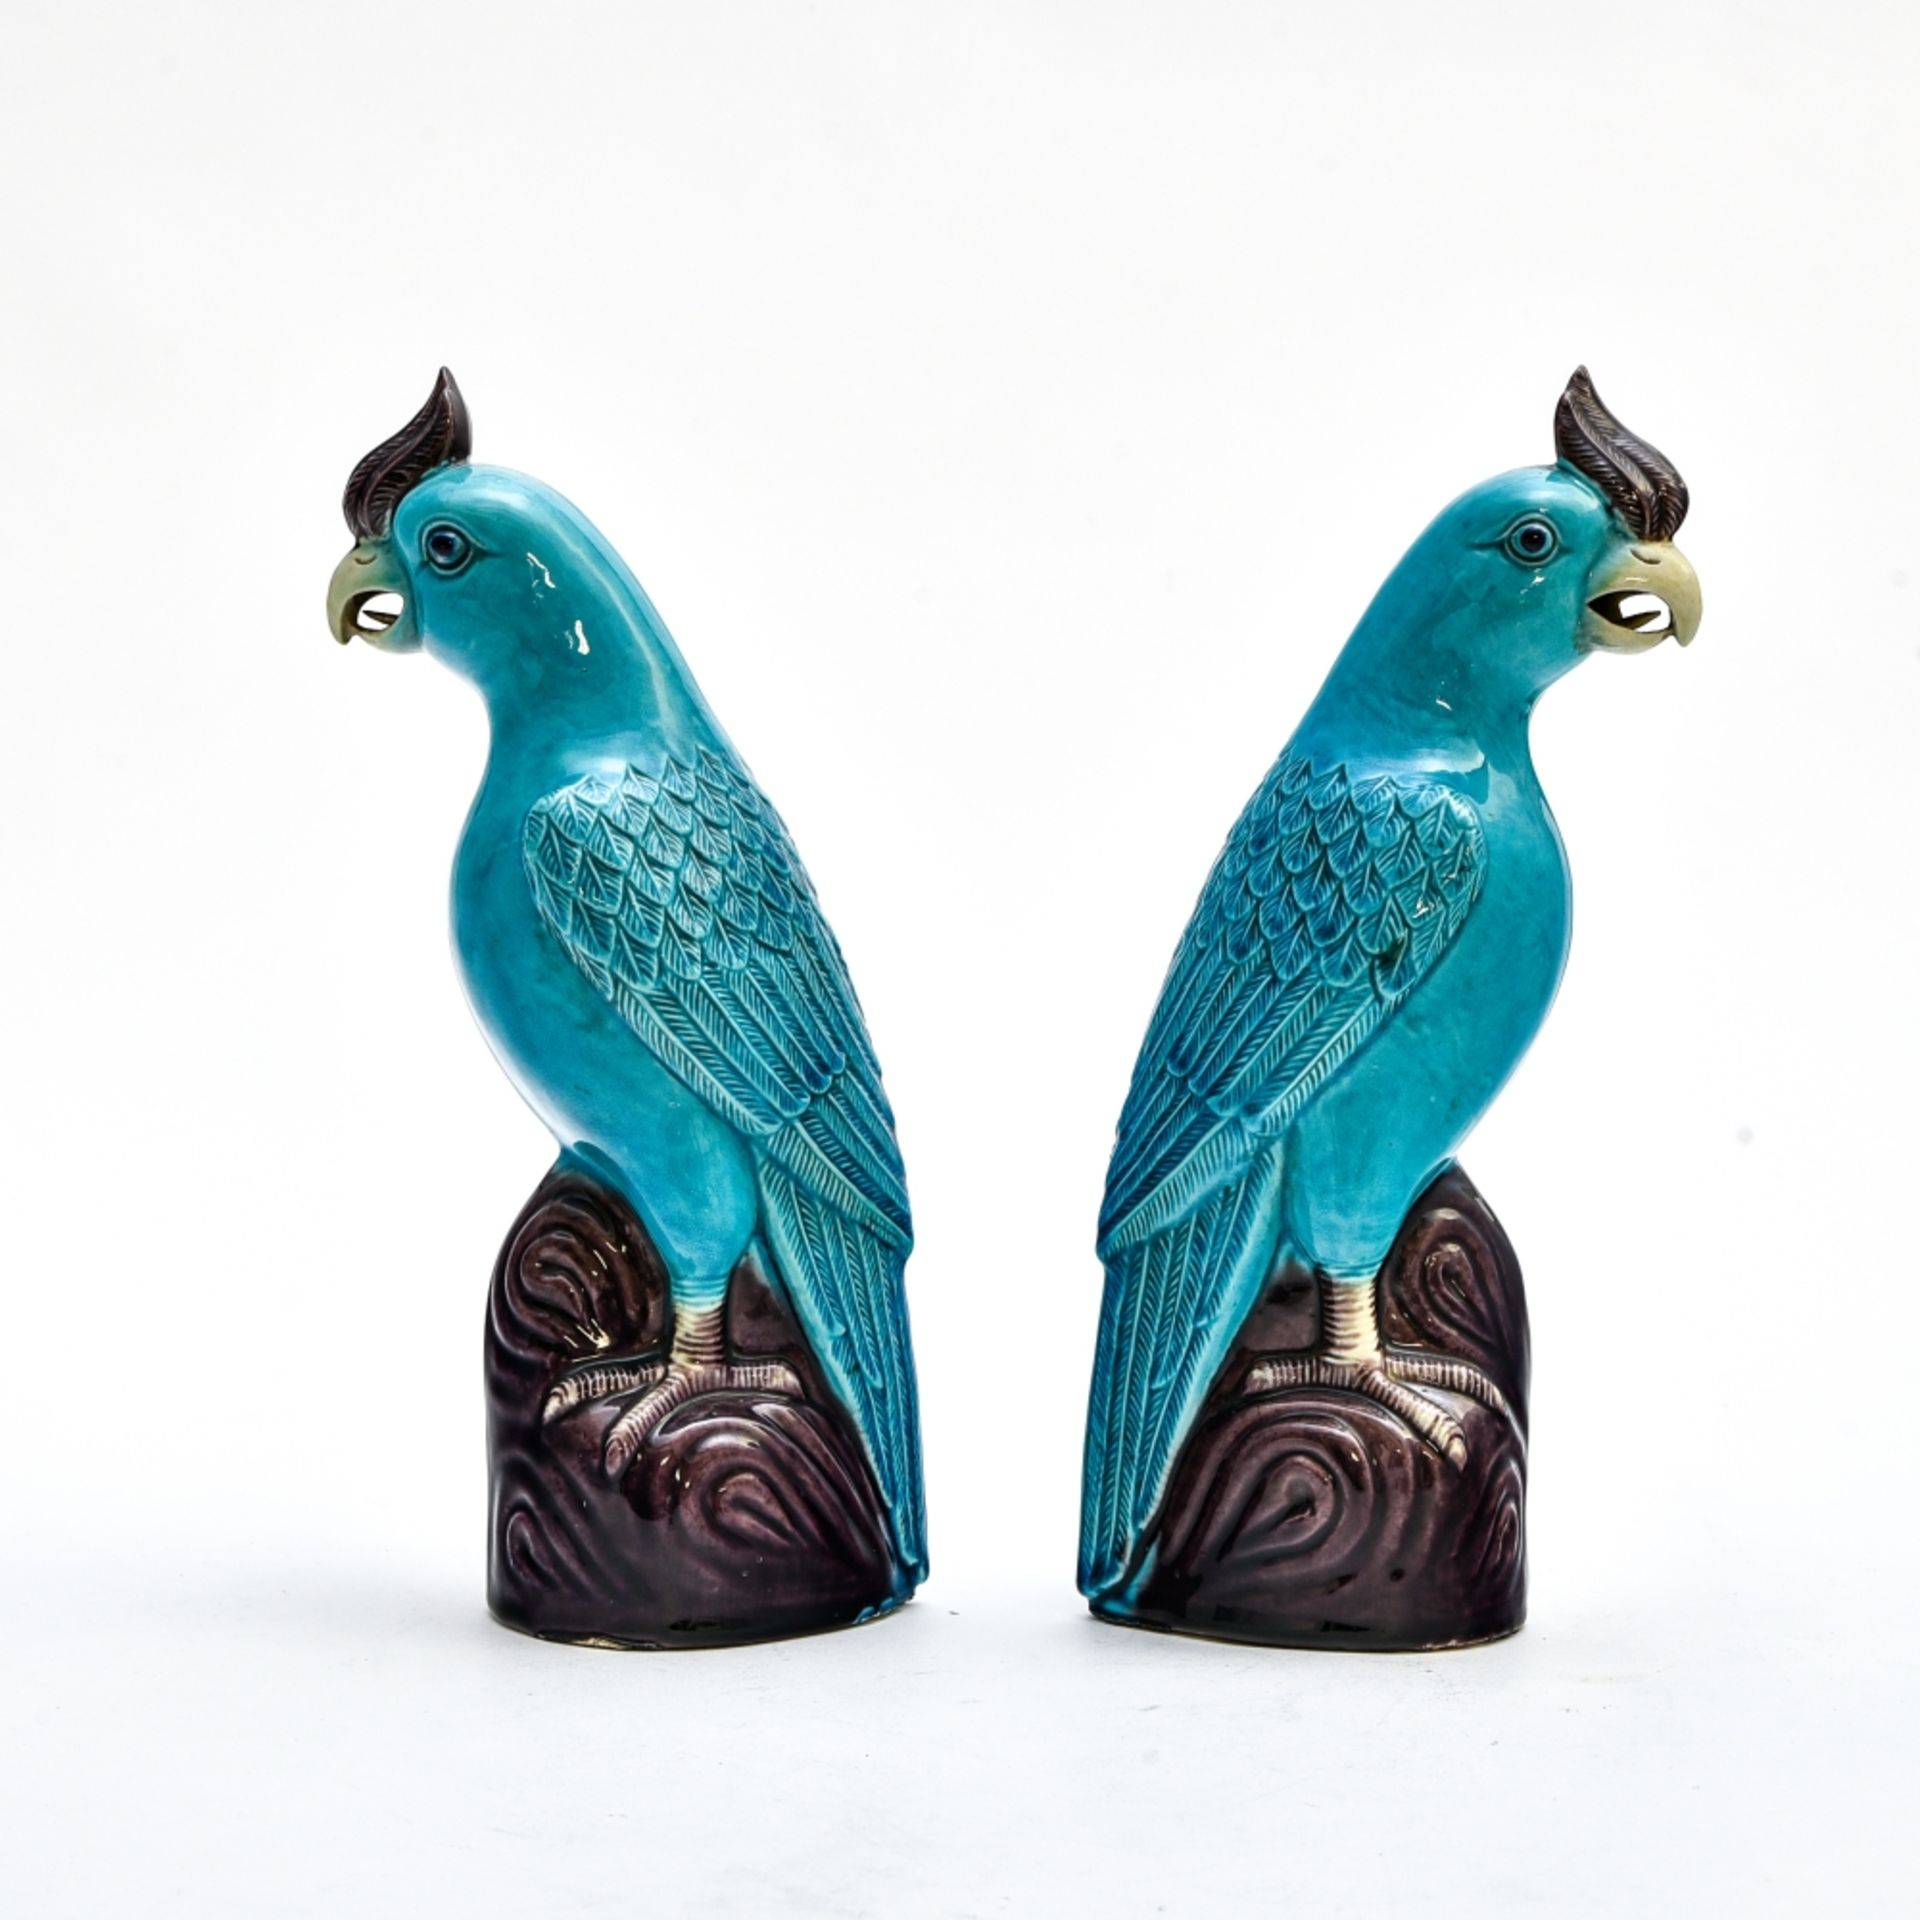 Two cockatoos 20TH CENTURY WORK polychrome enamelled ceramic H : 26,5 cm - Image 2 of 3